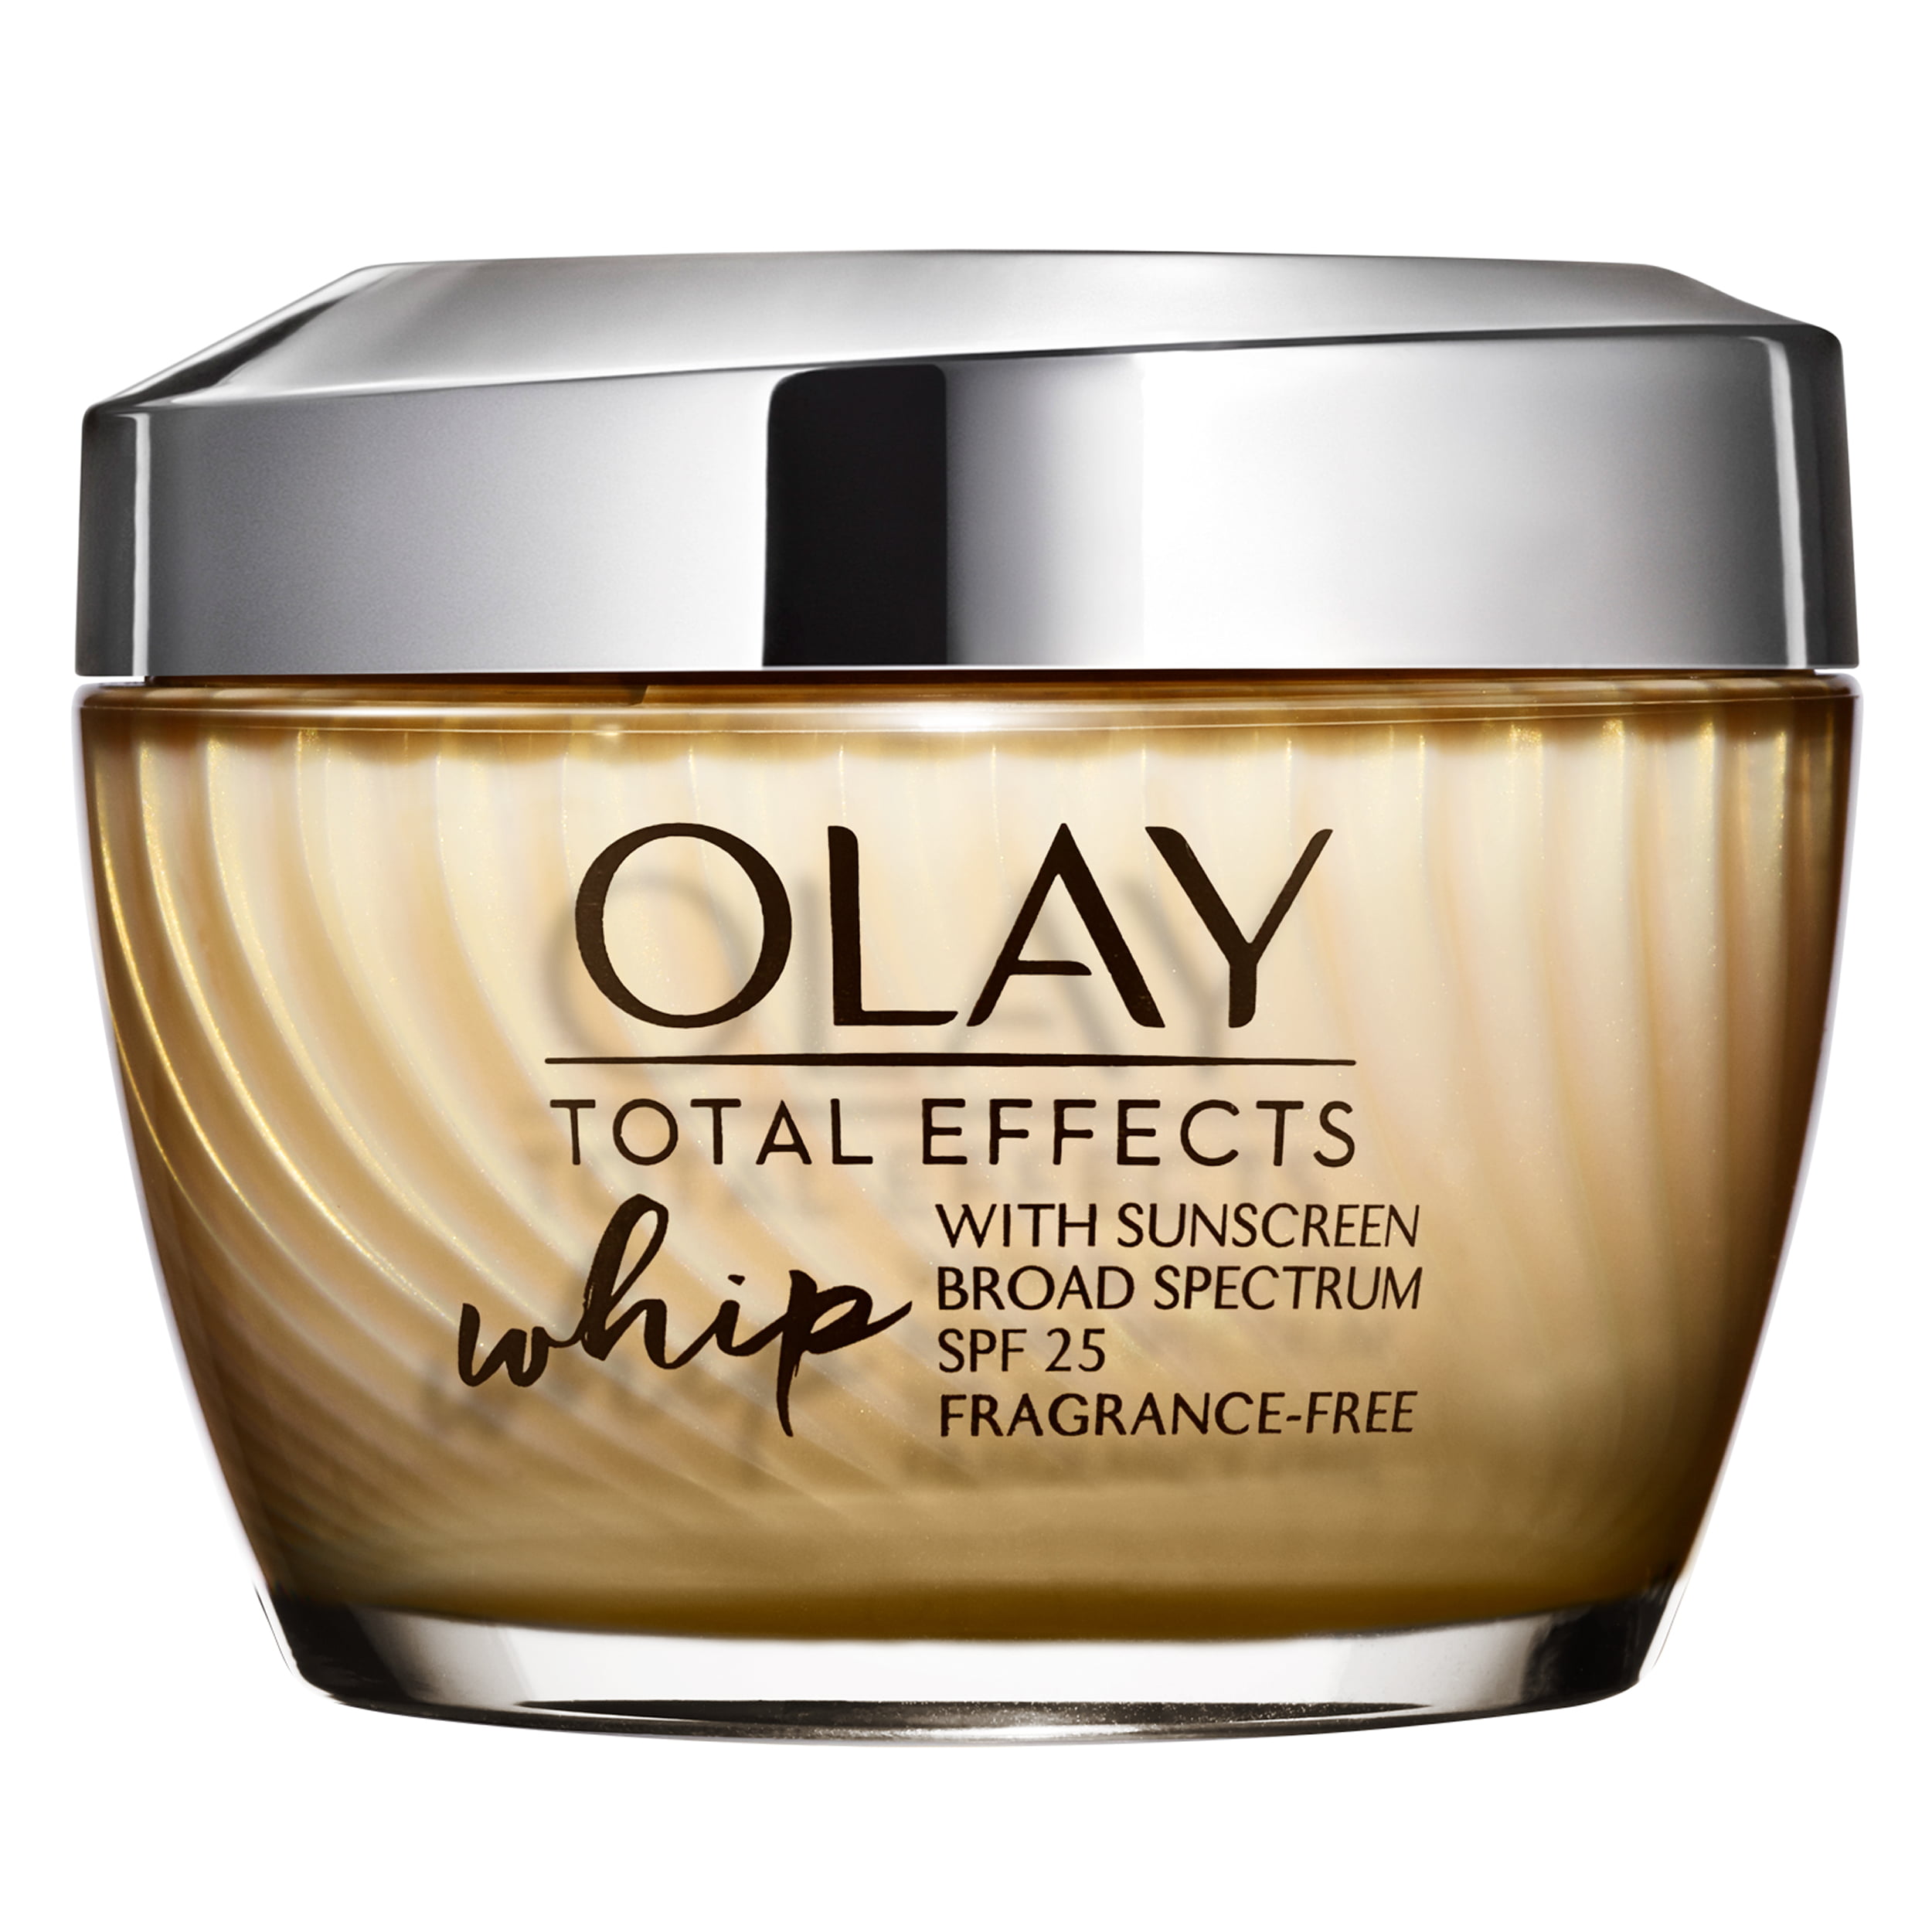 olay-total-effects-whip-moisturizer-fragrance-free-spf-25-1-7-oz